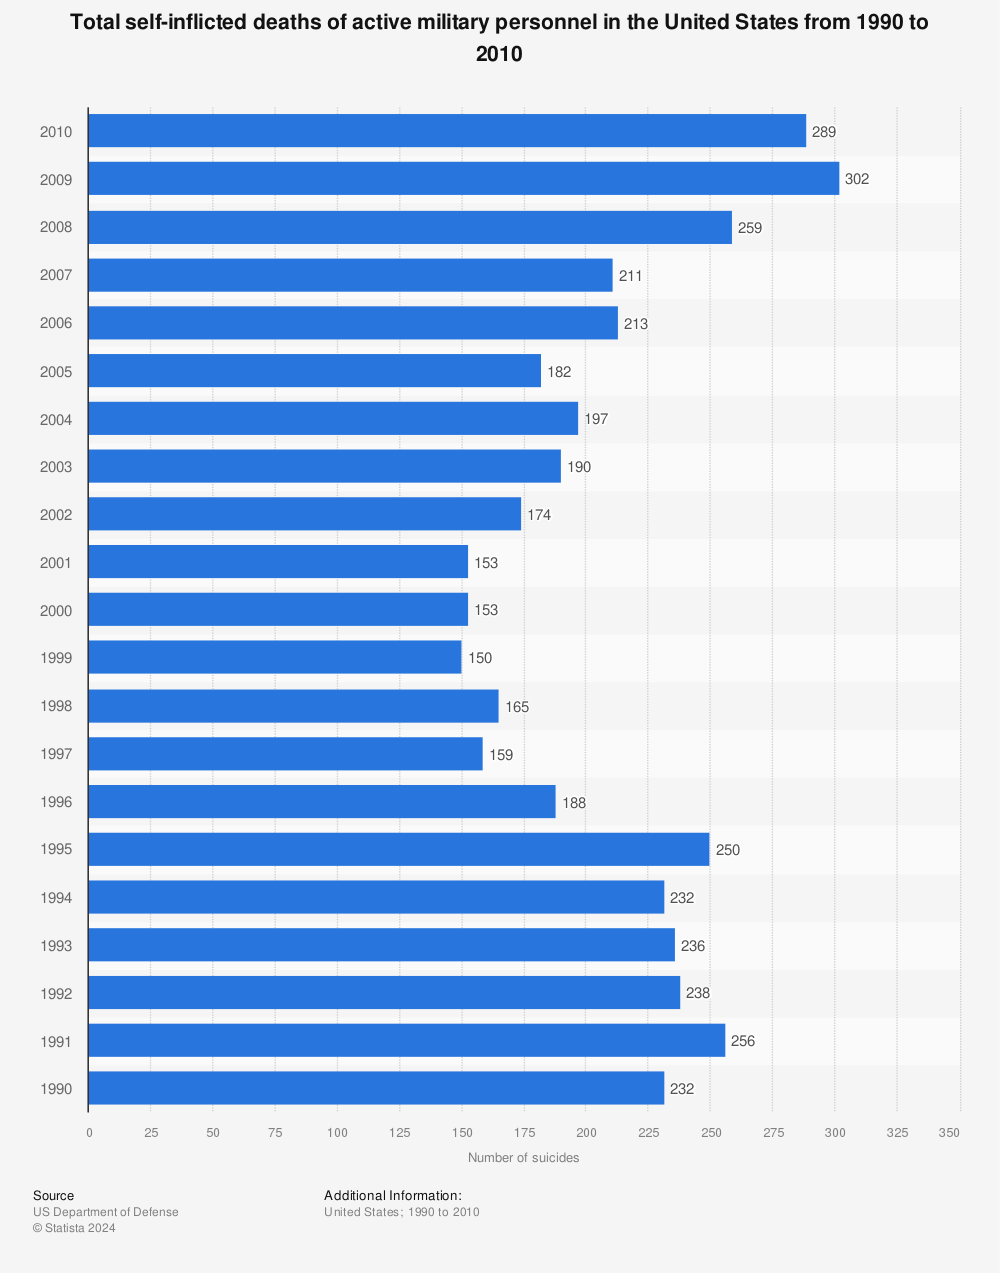 Statistic: Total self-inflicted deaths of active military personnel in the United States from 1990 to 2010 | Statista